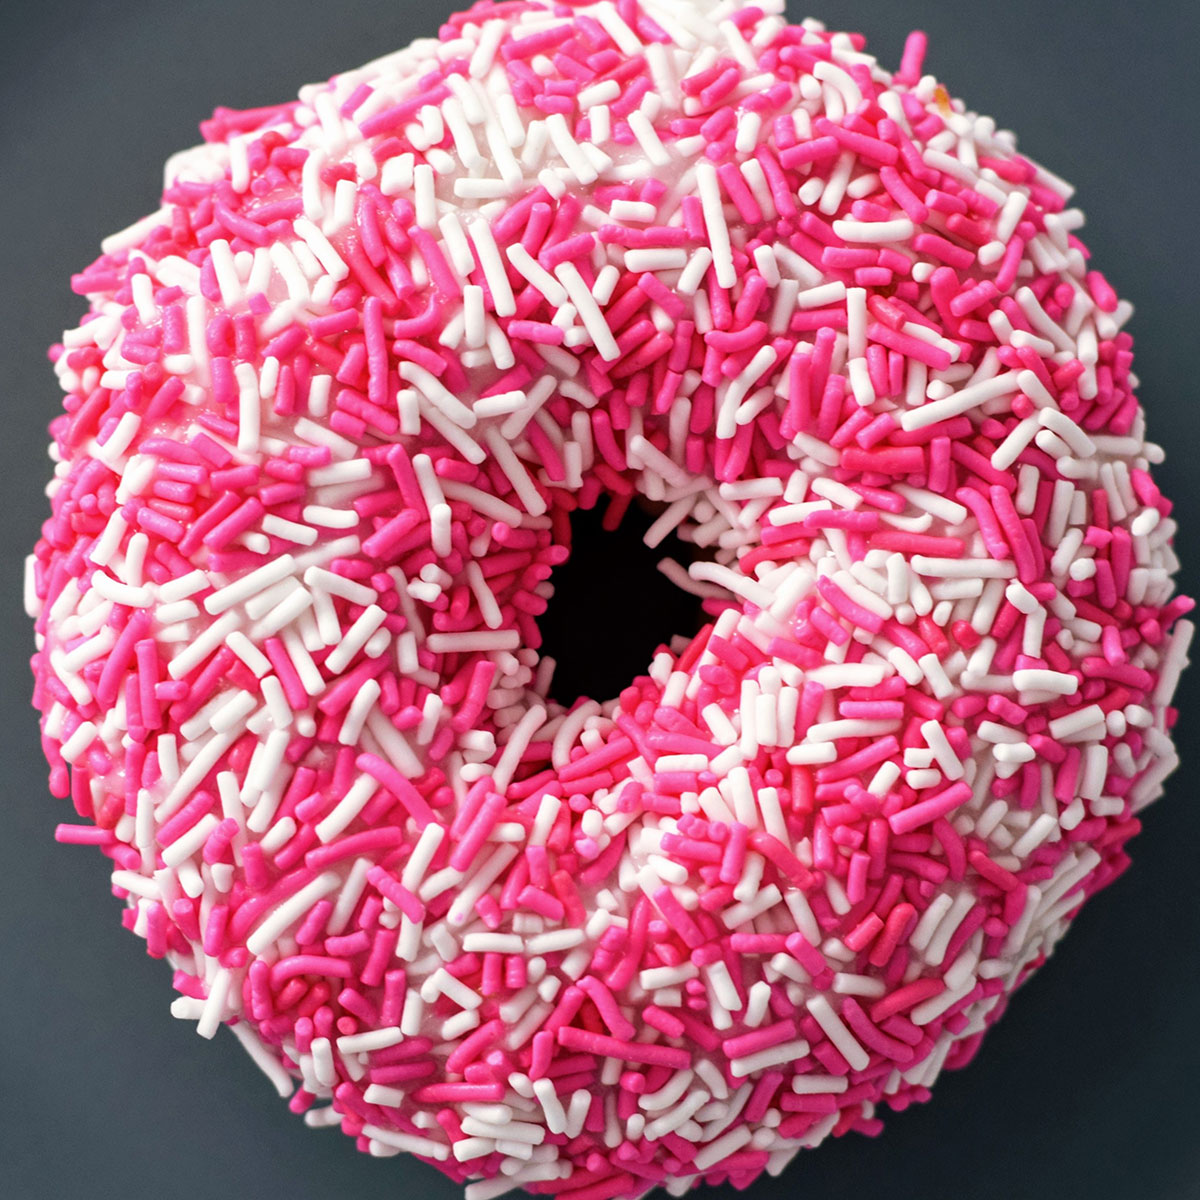 Donut with white and pink sprinkles